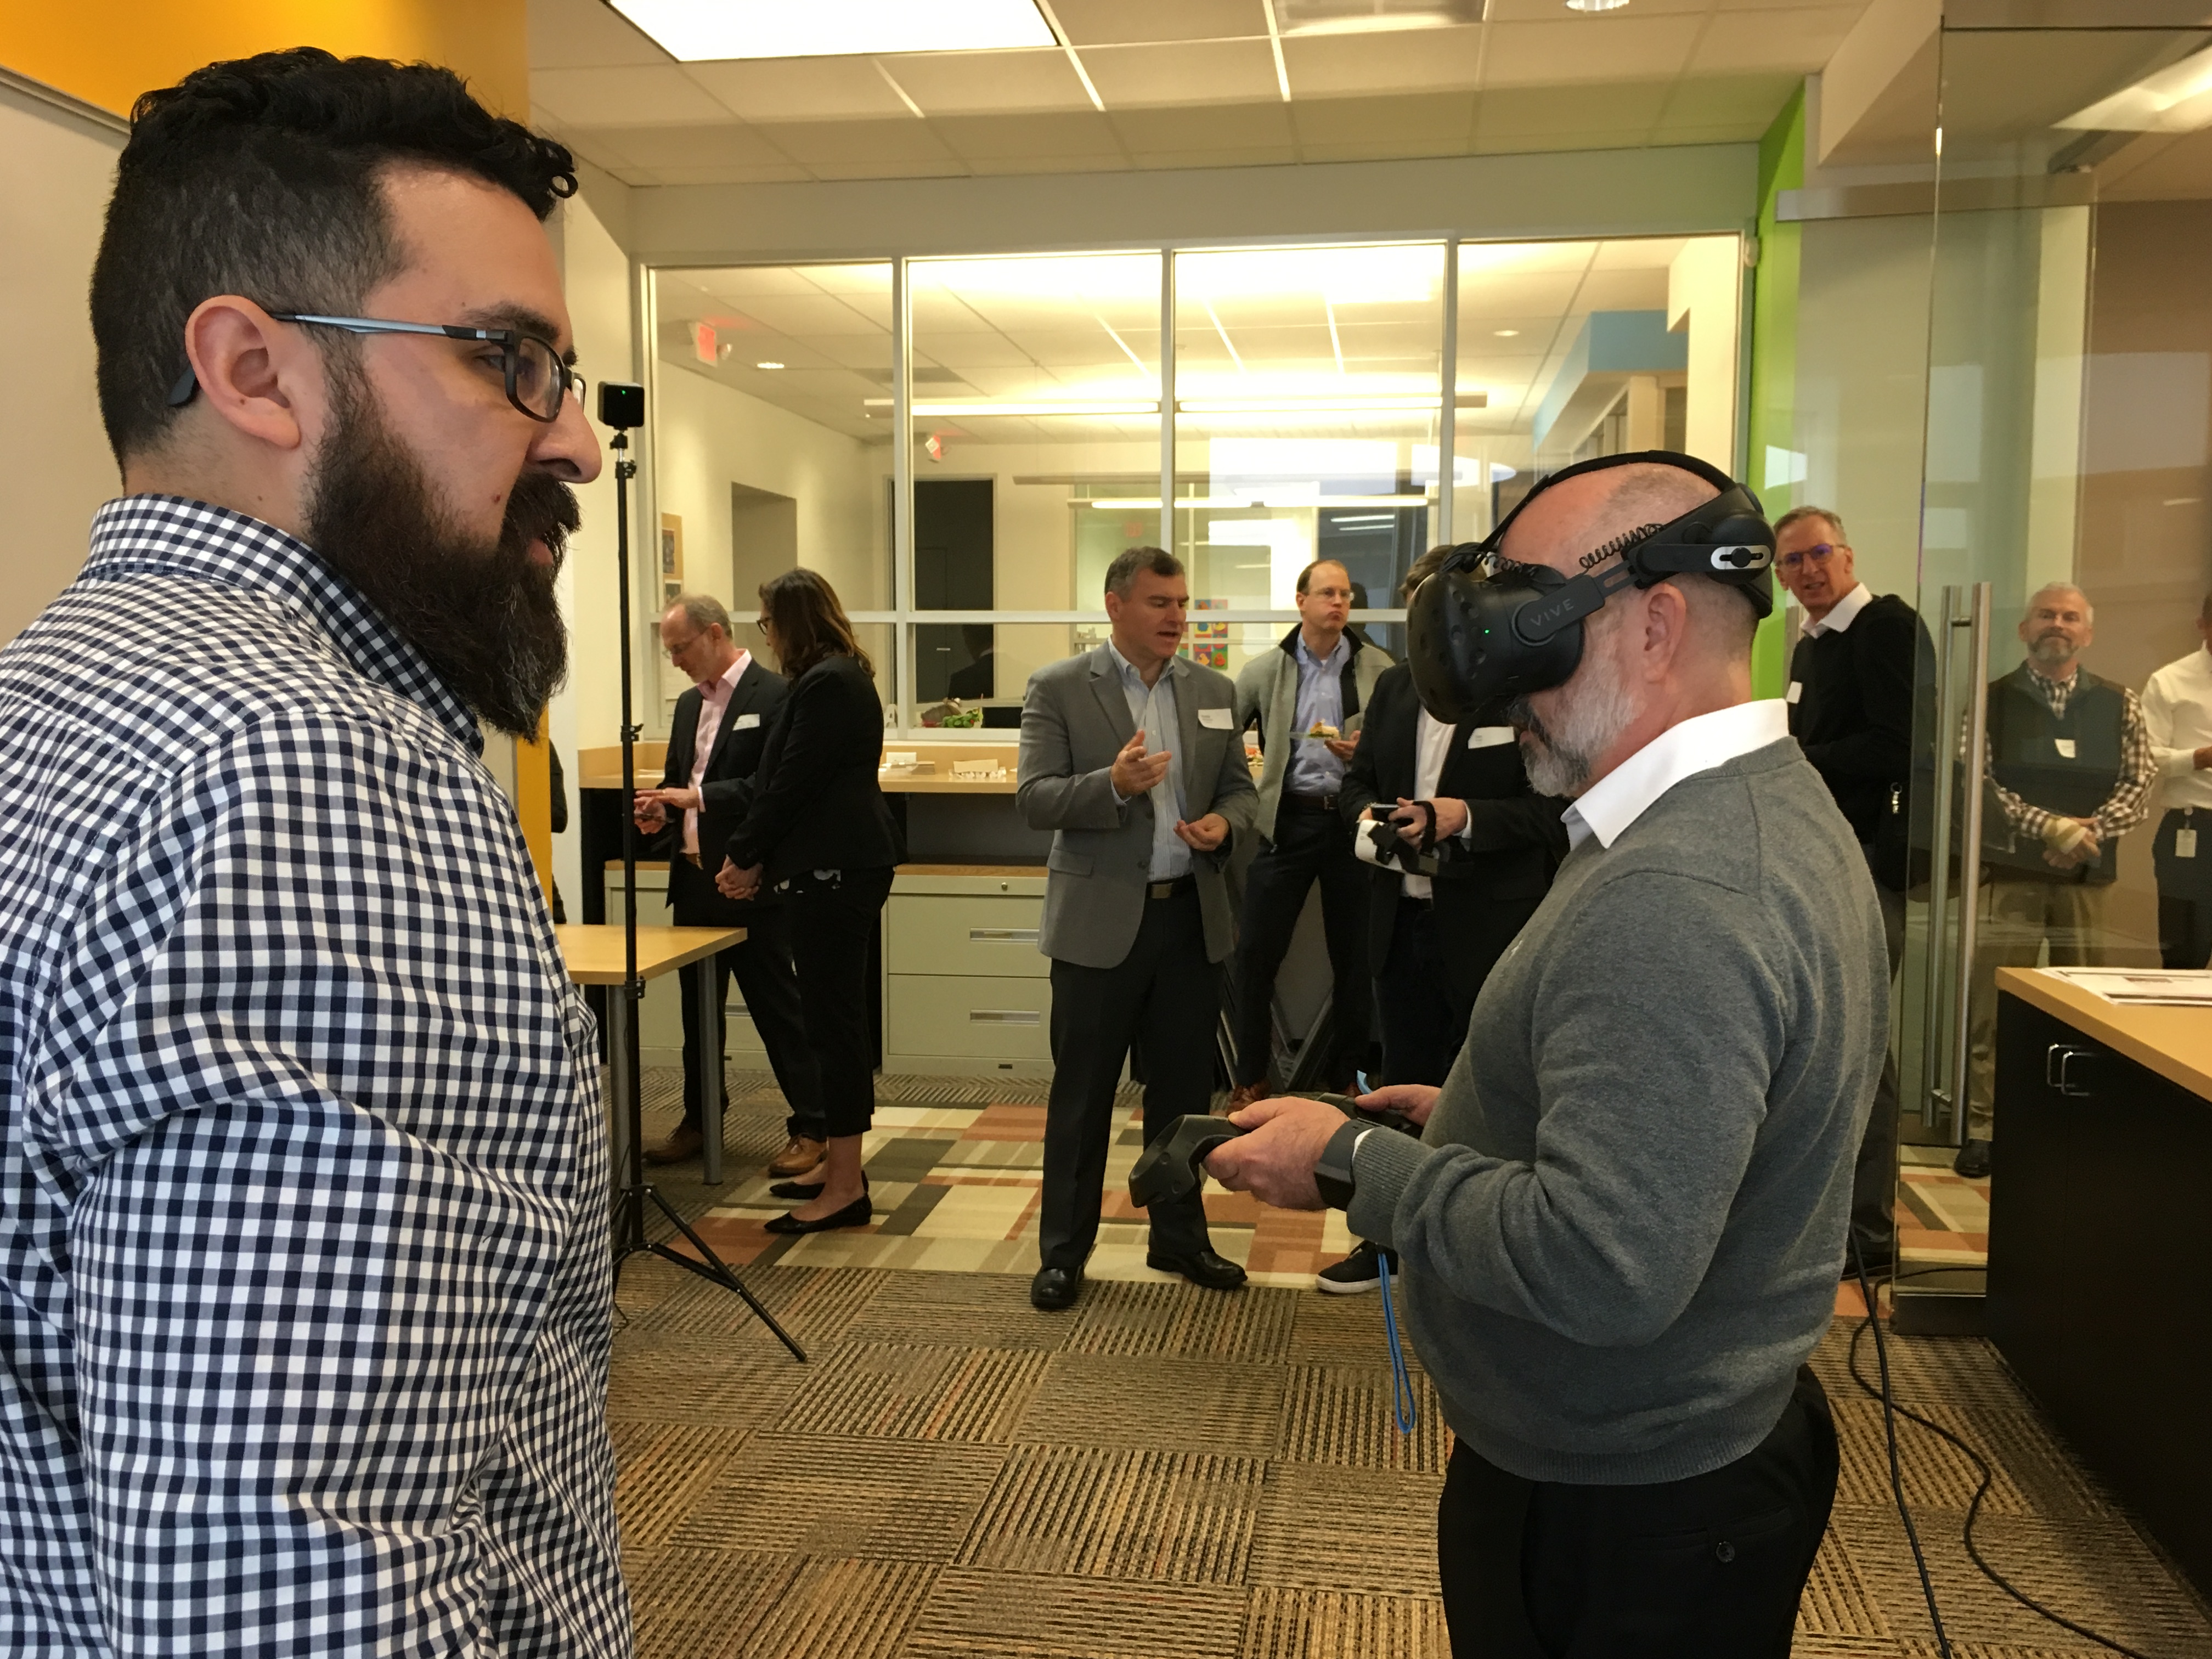 Clients utilizing VR/AR technology at BE's office.